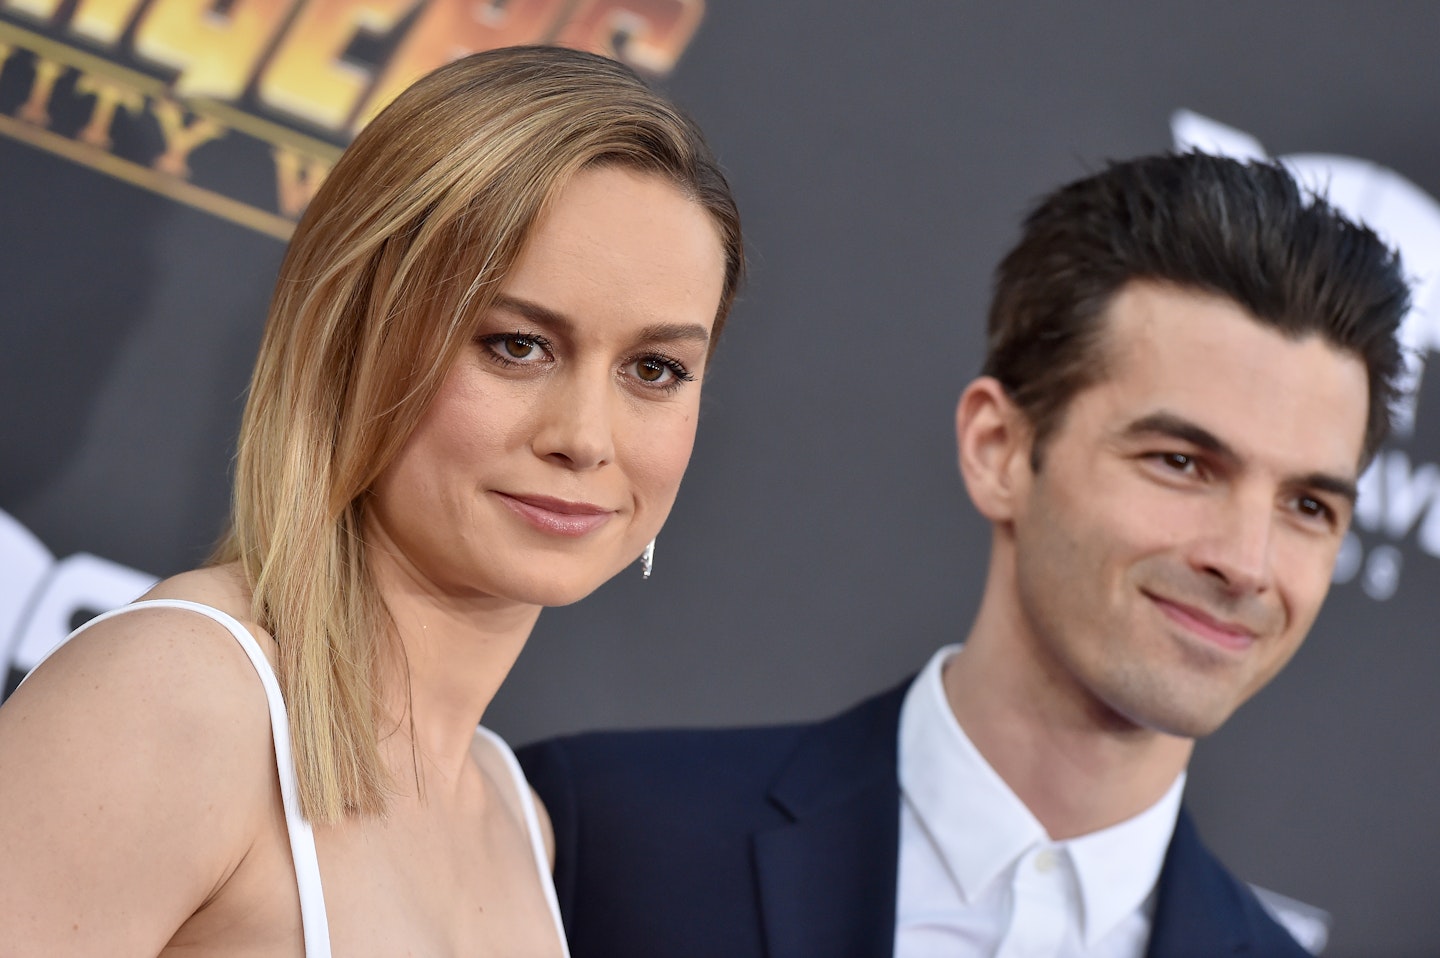 Brie Larson and Alex Greenwald have called off their engagement